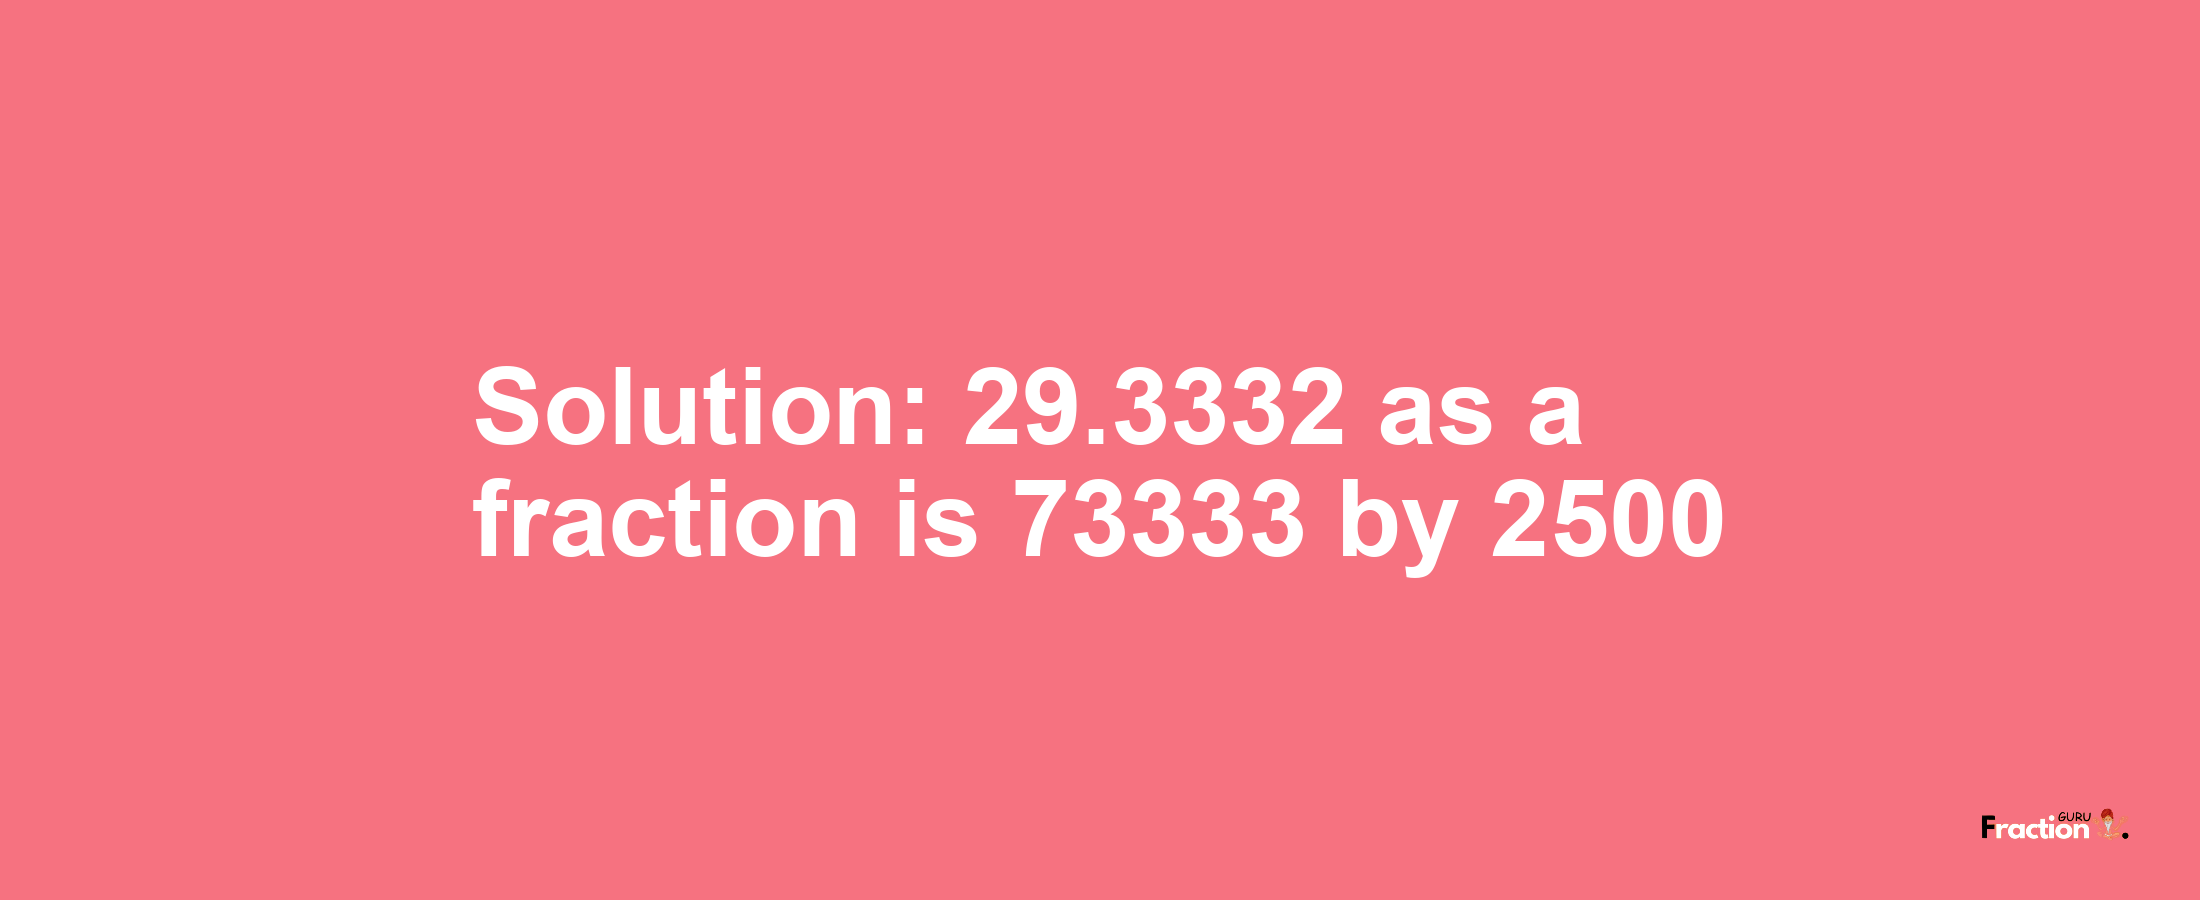 Solution:29.3332 as a fraction is 73333/2500